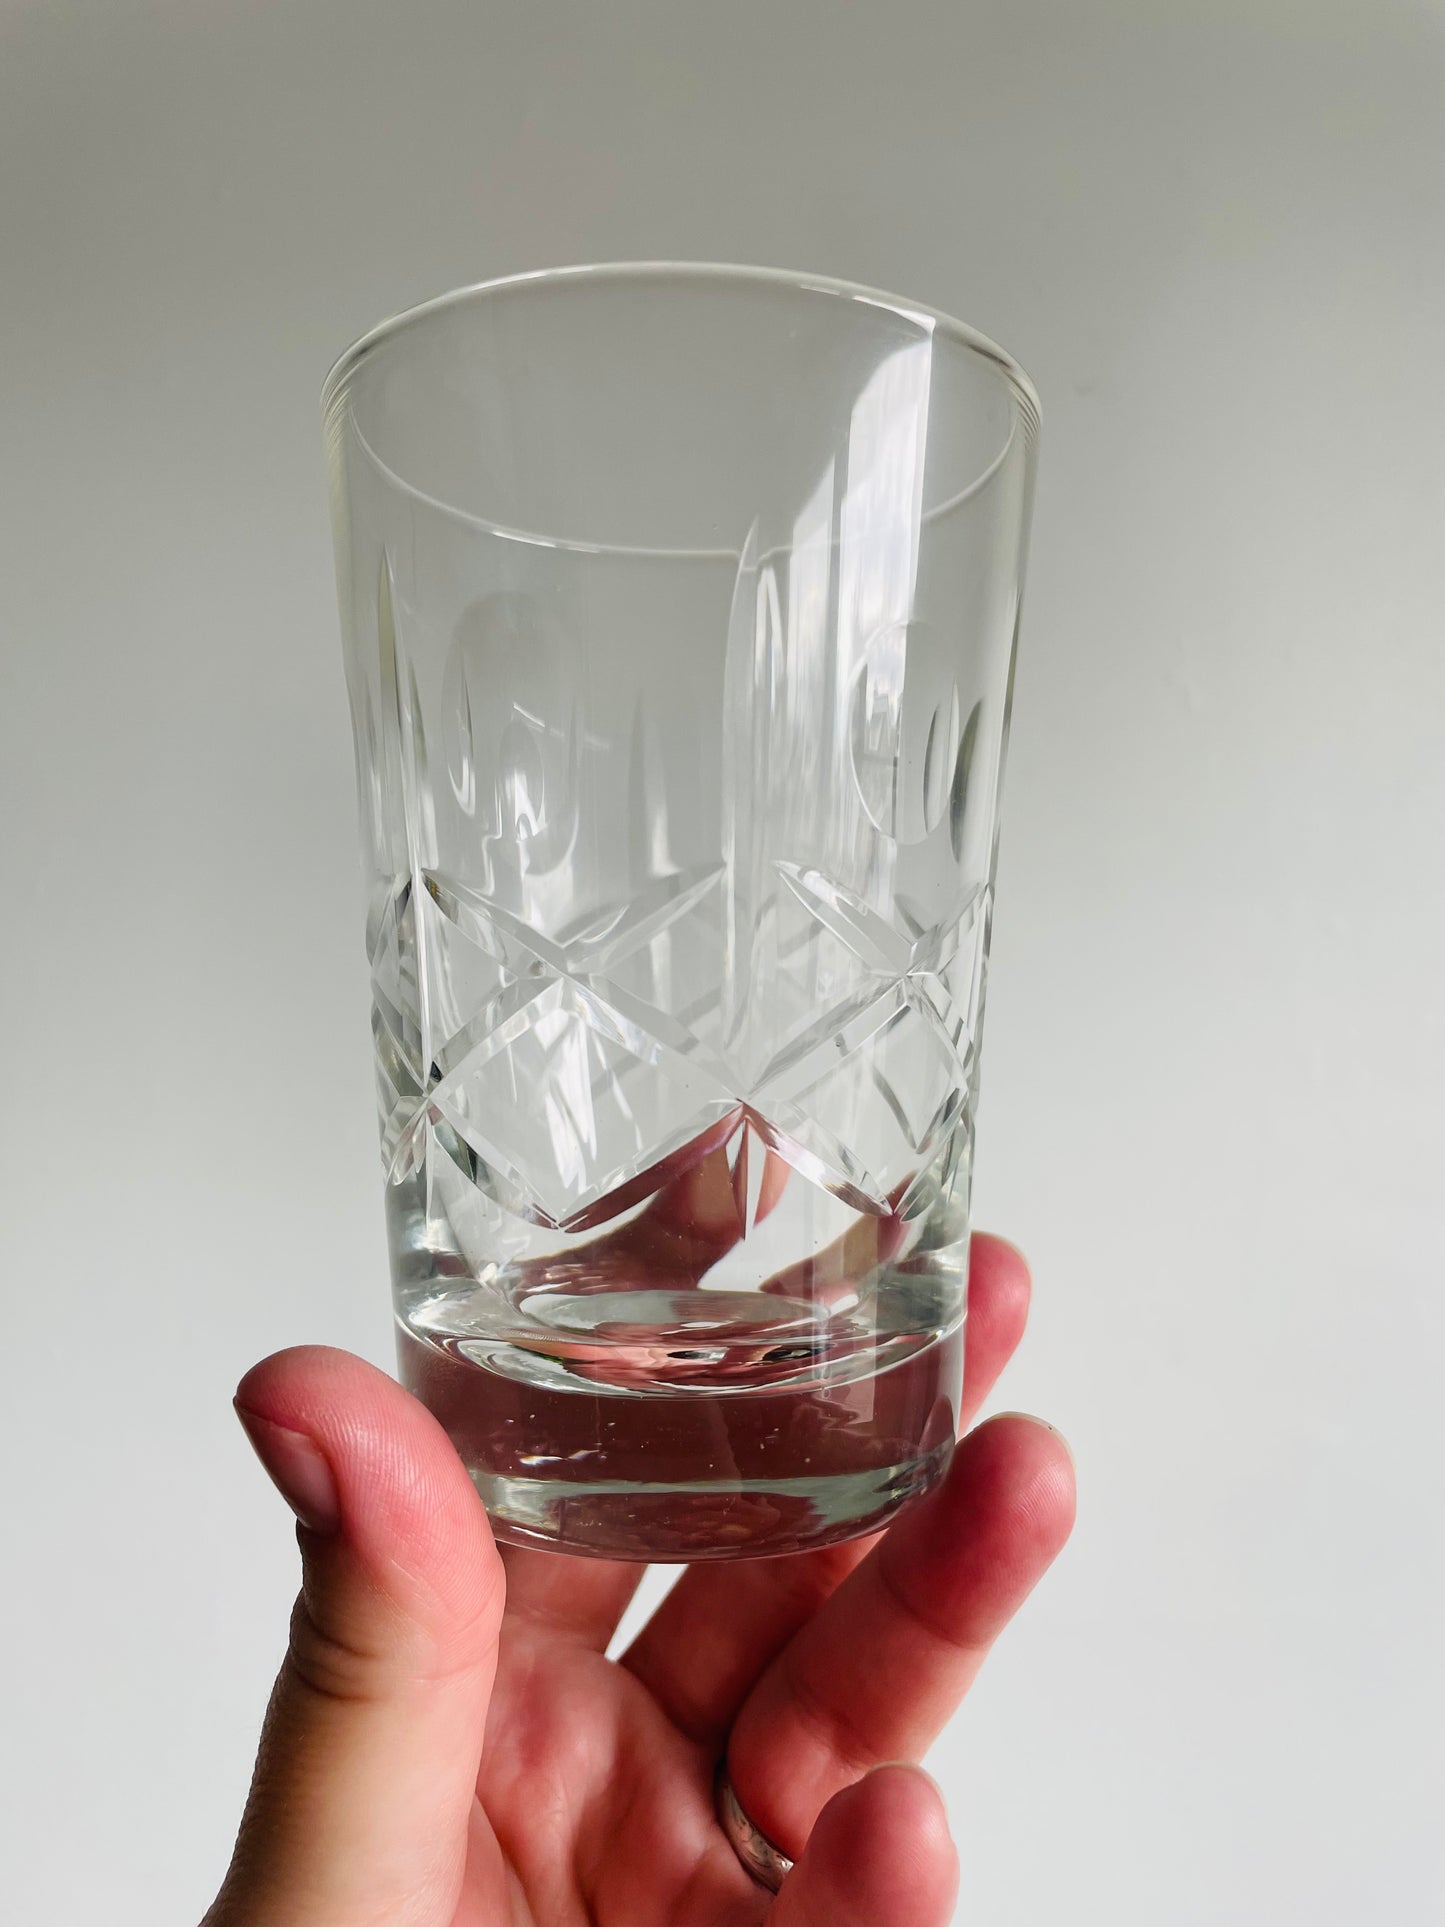 Clear Drinking Glasses or Cocktail Tumblers with Cut Glass Design - Set of 4